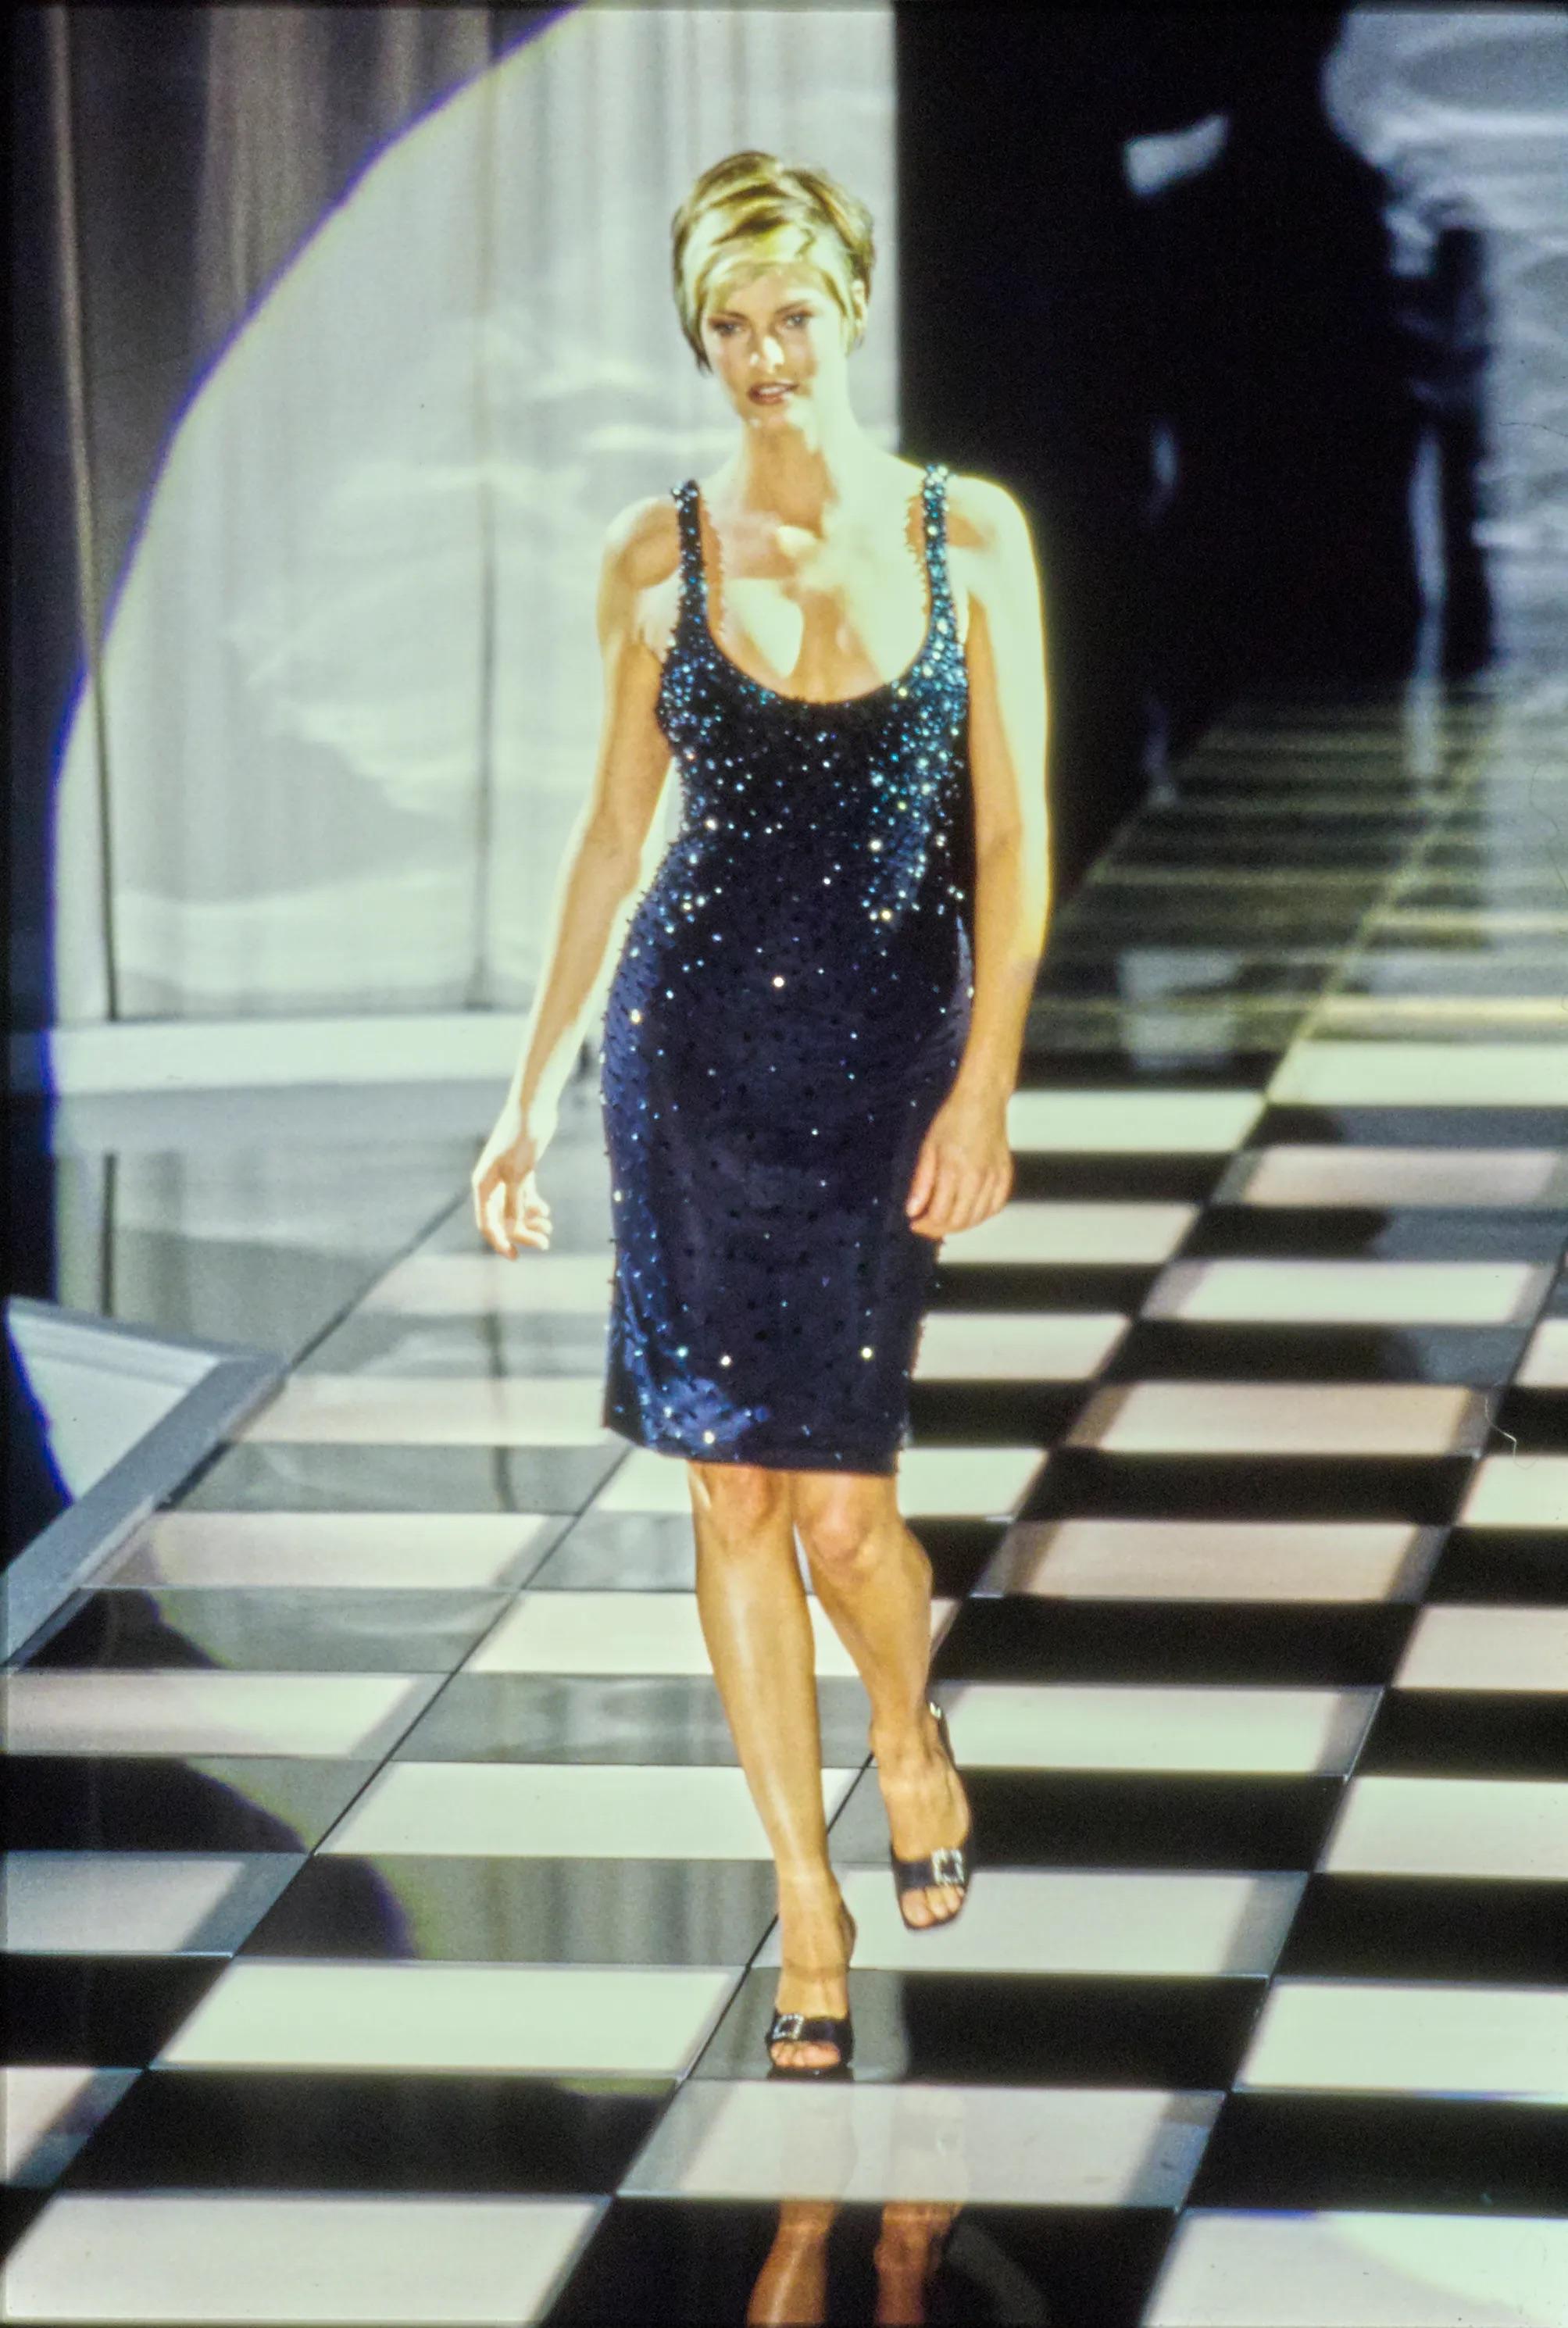 Presenting a fabulous black body con Gianni Versace mini dress, designed by Gianni Versace. From the Spring/Summer 1996 collection, this dress debuted on the season's runway as look 52, modeled by Linda Evangelista. This incredibly chic LBD is